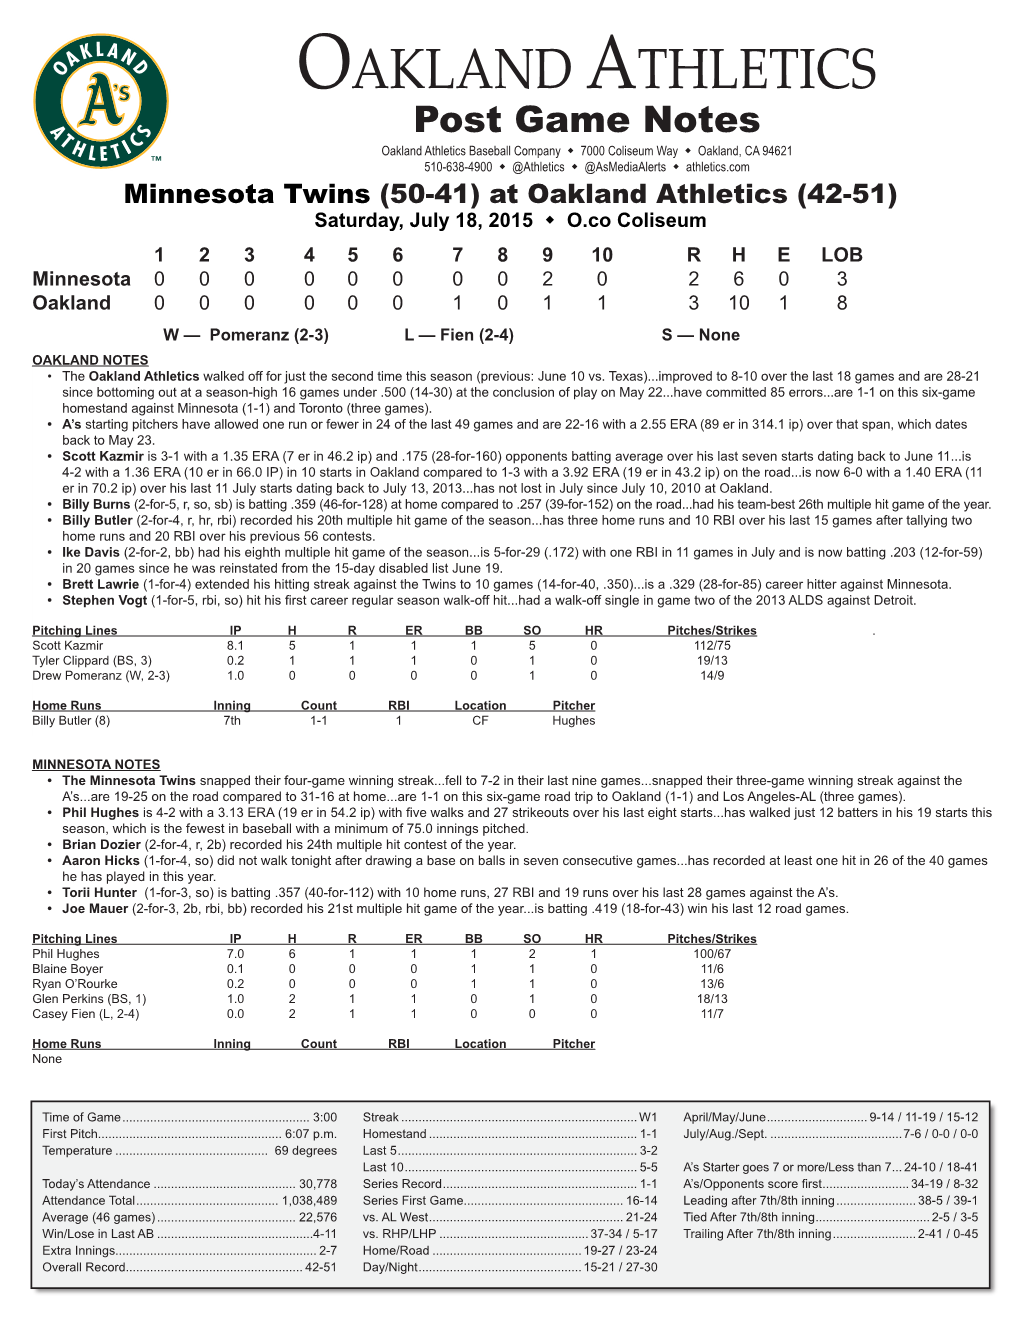 07-18-2015 A's Post Game Notes